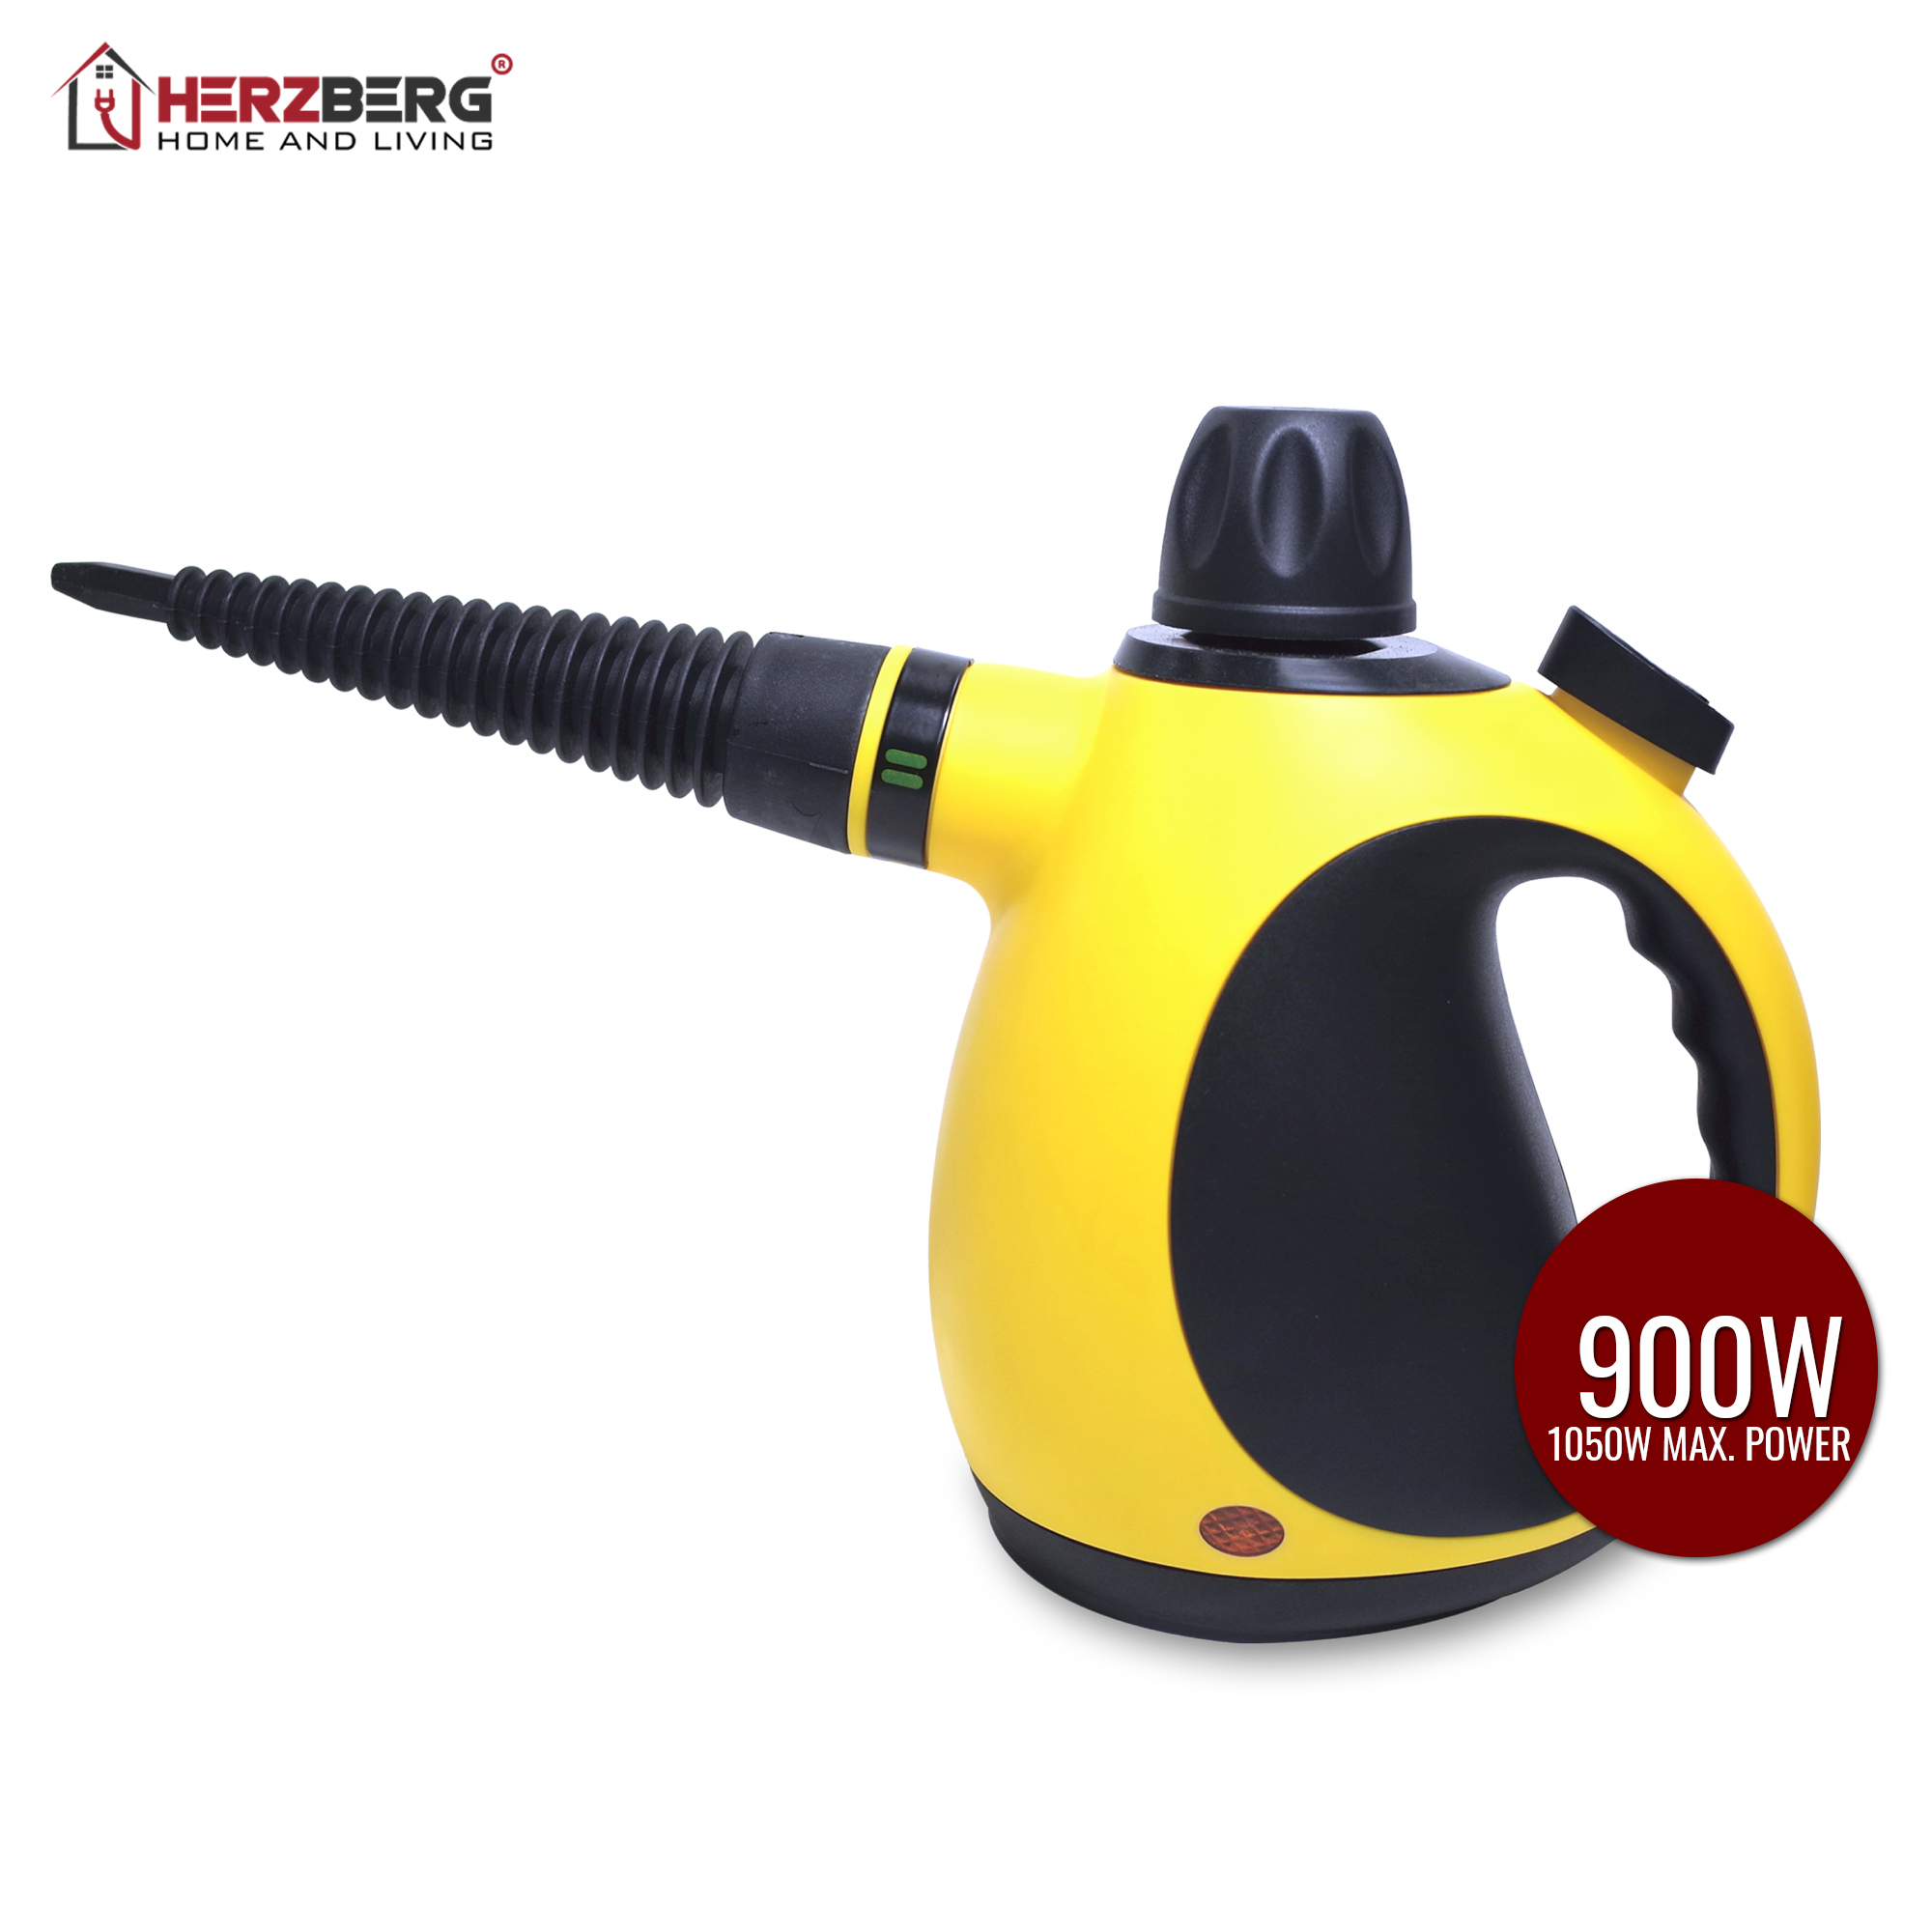 Steam Cleaner, home steam cleaner, cleaning equipment